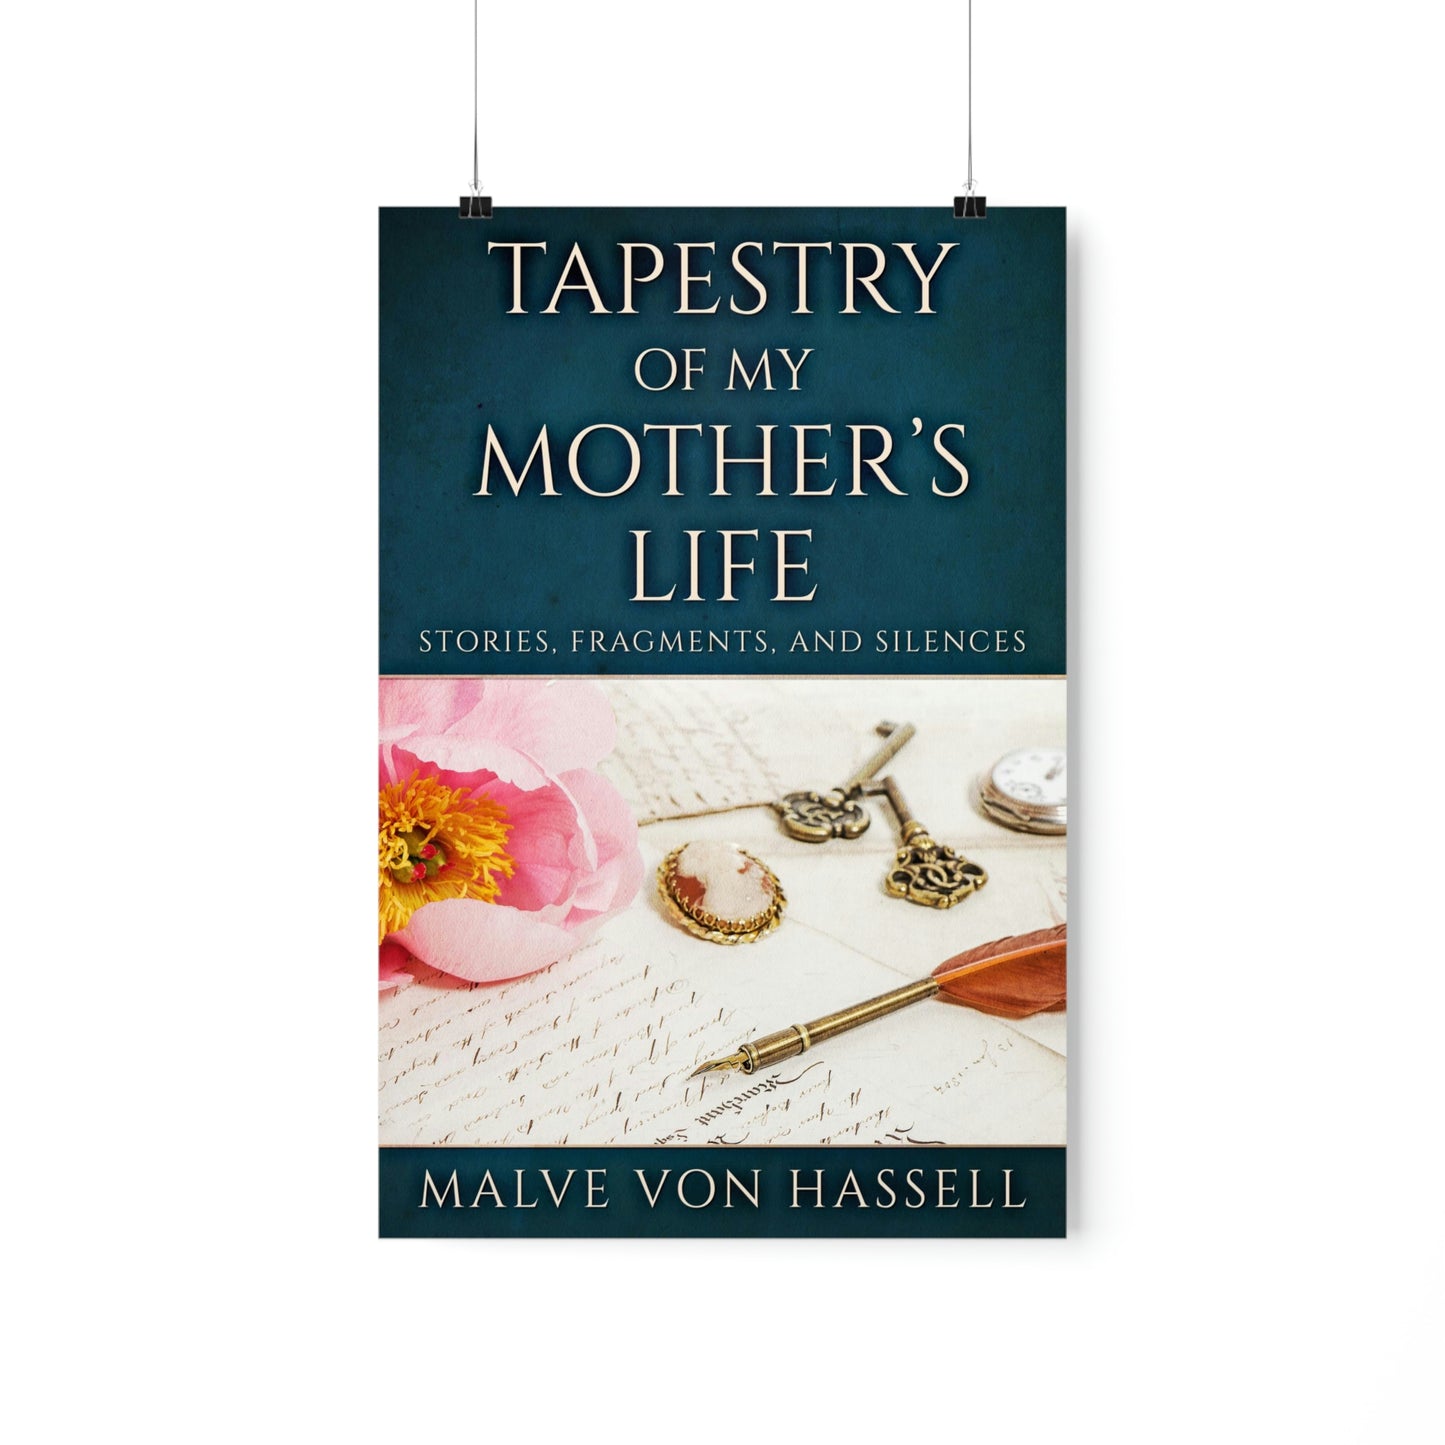 Tapestry Of My Mother???s Life - Matte Poster